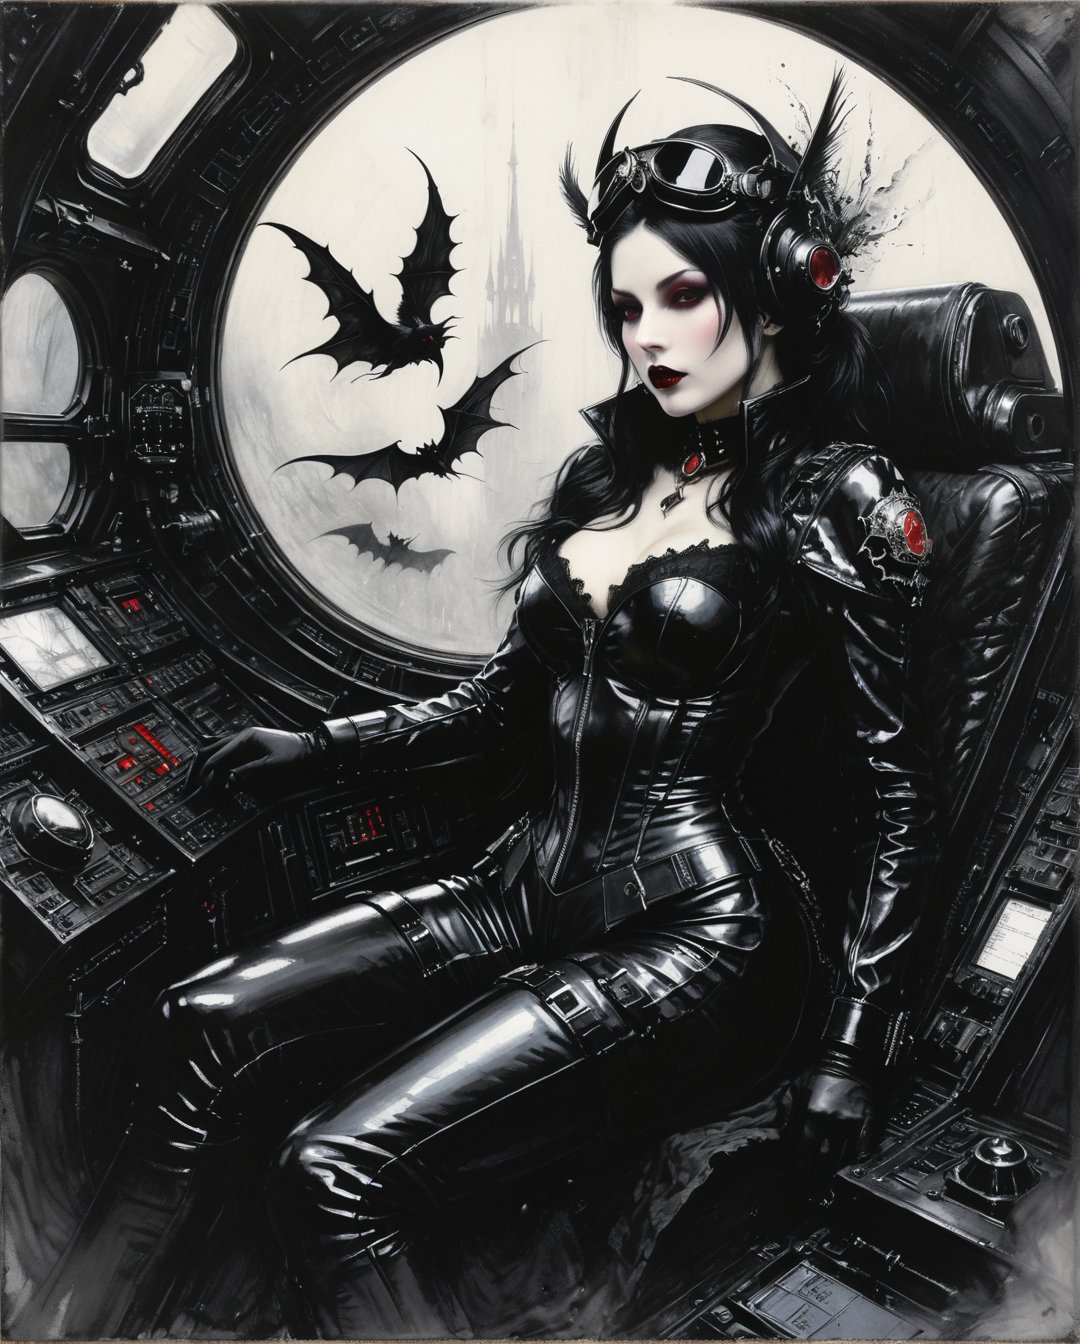 Art style by amano yoshitaka, ((mature)) gothic lying ((in a ruby goth cockpit)), (lying on a baroque pilot cockpit), ((gothic control panels everywhere)), (headgear), ((mature)), ruby cockpit, ((vampiric cockpit)), iridescent pilot bodysuit, lace accesories, ((serious tone)), elegant, futuristic, vampiric, full body view from above, action pose, (fisheye), [close up], dark place, dramatic lighting, intricate control panel details, steaming, 1990s (style), in the style of nicola samori, detailed 8k horror artwork,, in the style of Bernie Wrightson, Anders Zorn, Alexi Brilo, Luis Royo, extremely detailed, dark, charcoal drawing, black pencil drawing,